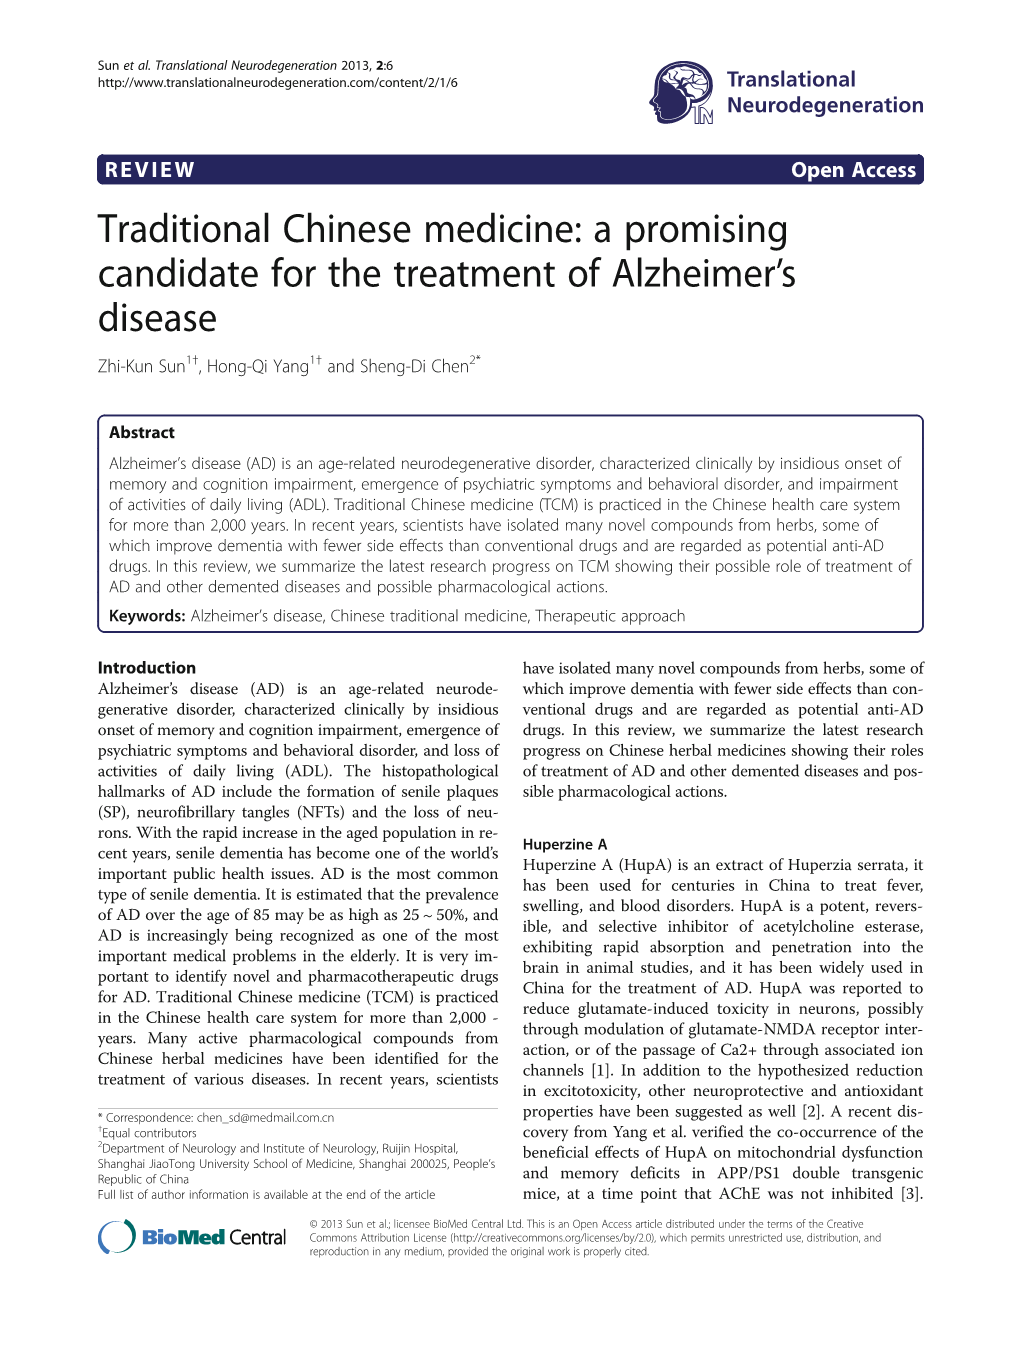 Traditional Chinese Medicine: a Promising Candidate for the Treatment of Alzheimer’S Disease Zhi-Kun Sun1†, Hong-Qi Yang1† and Sheng-Di Chen2*